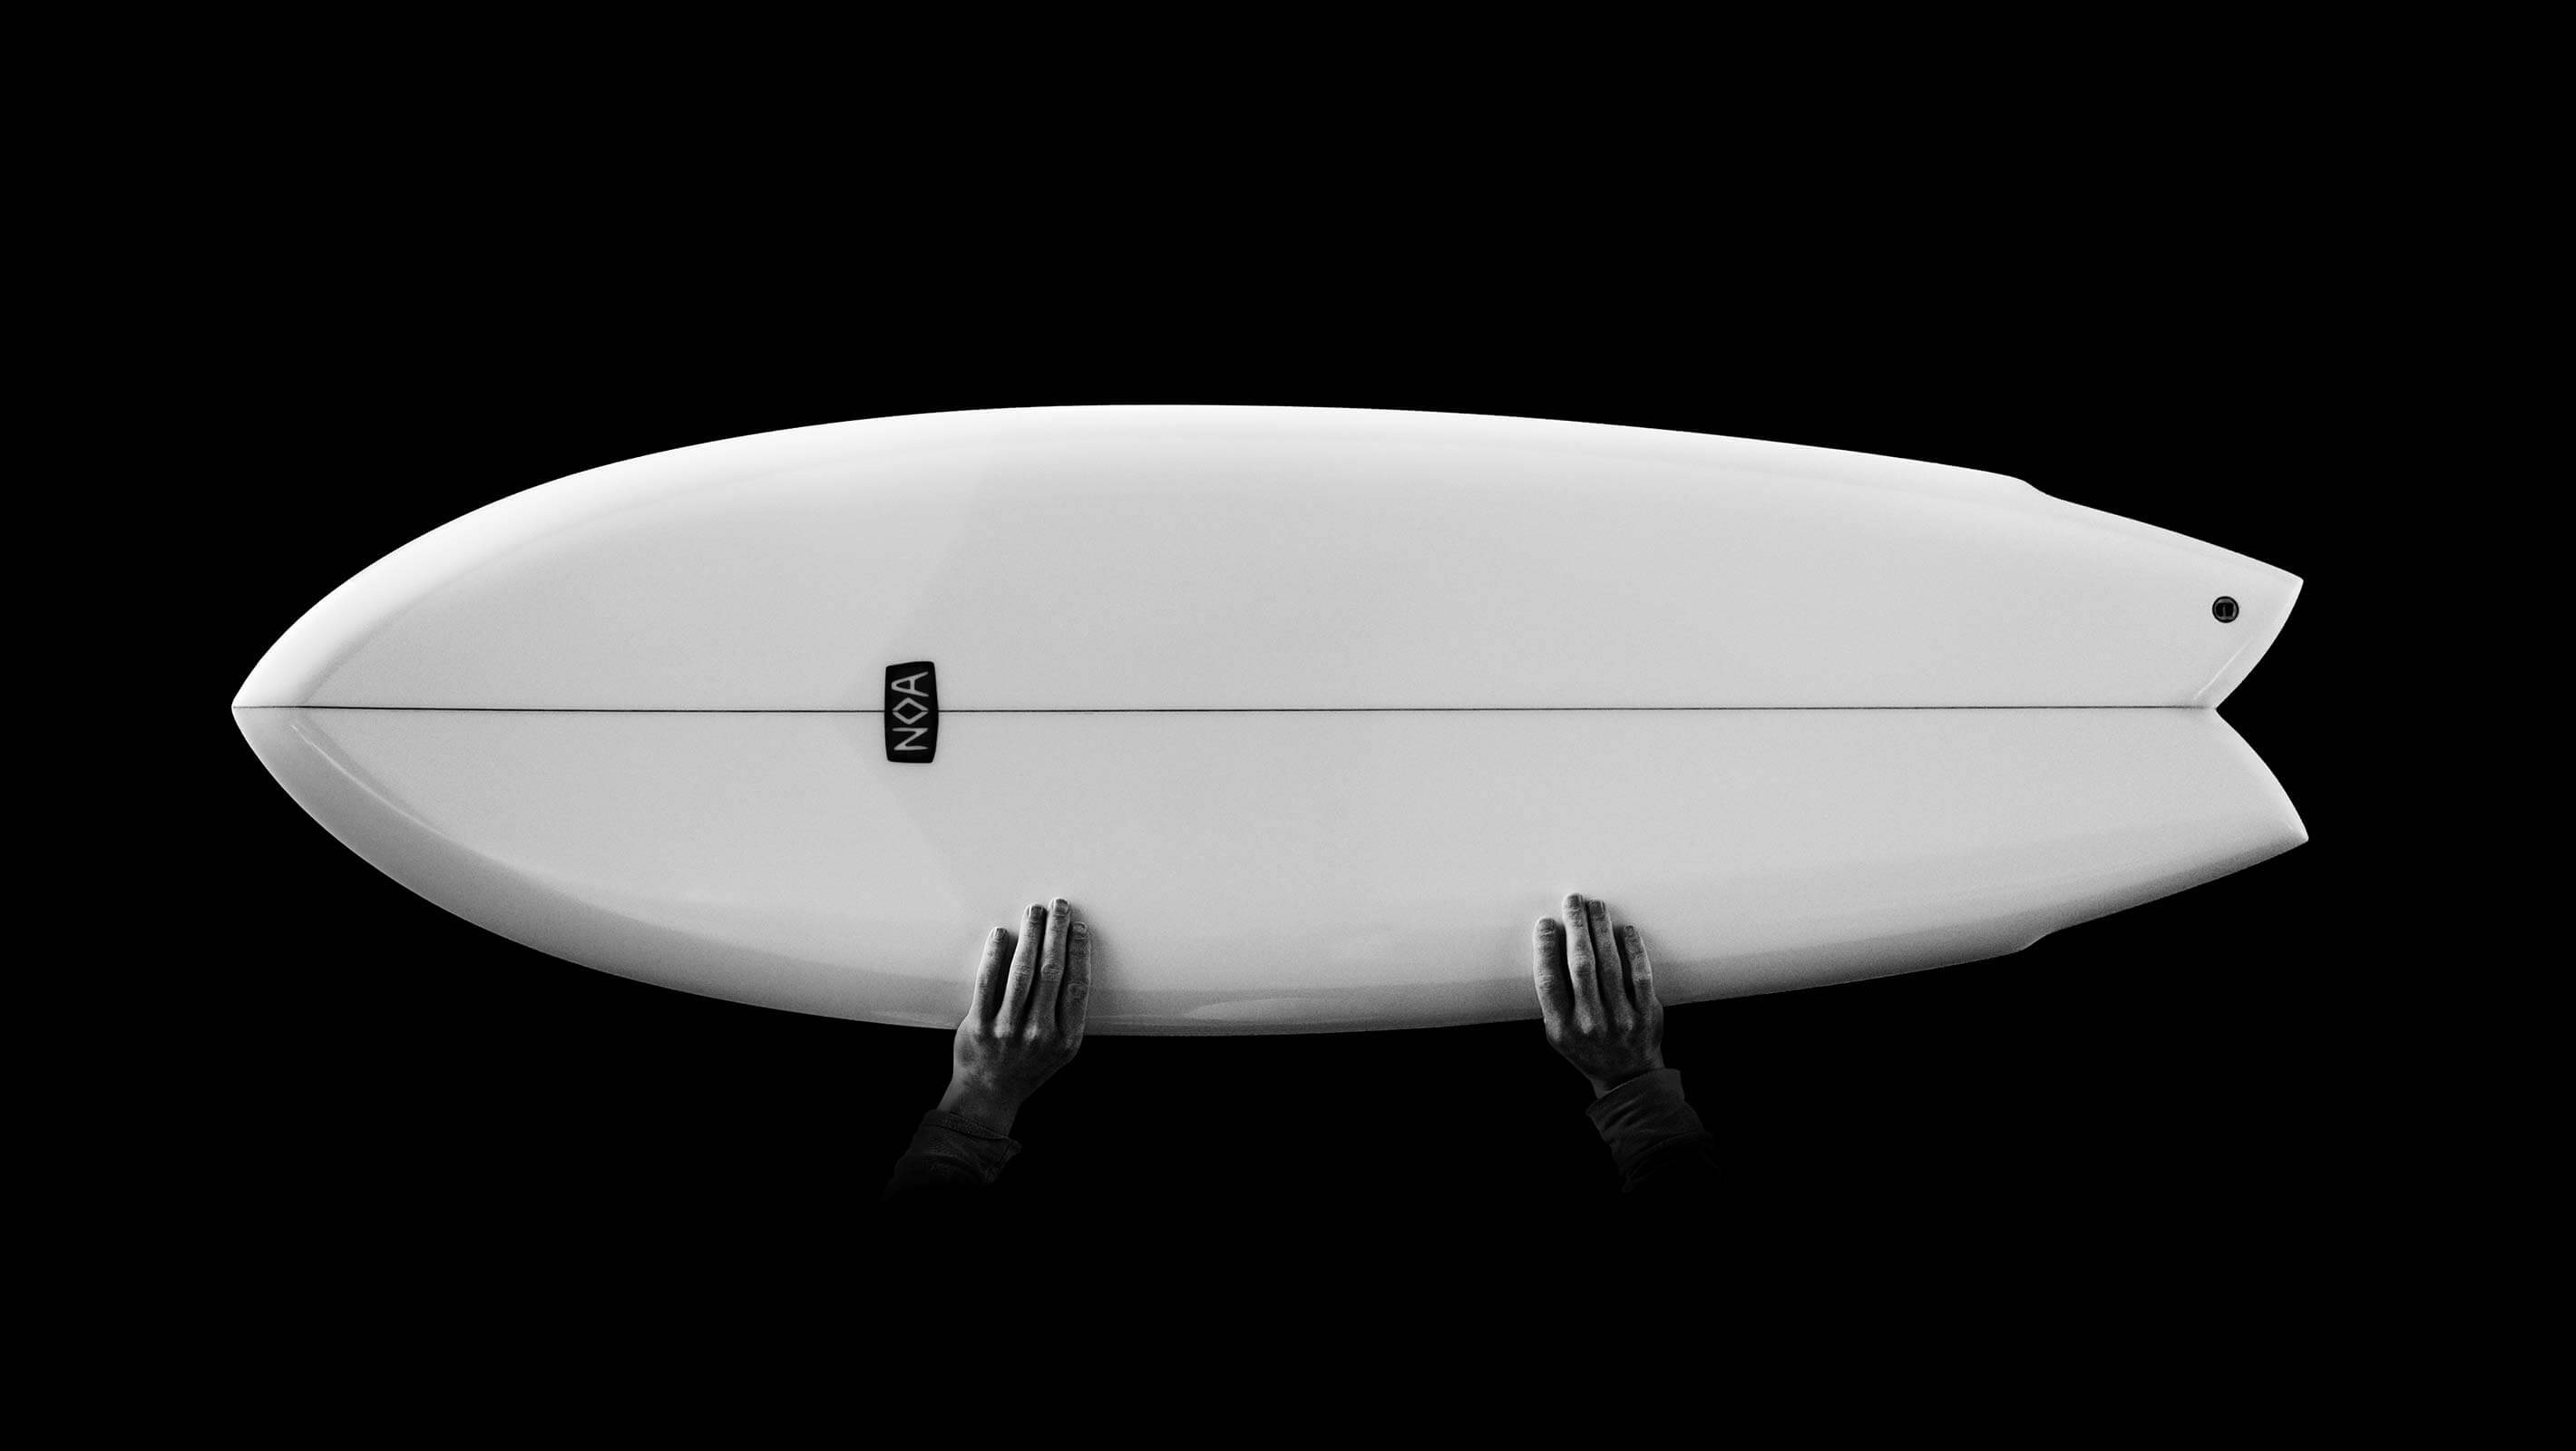 Two hands holding a white surfboard in fish shape horizontally in the air on a black background in harsh light that highlights the beautiful curves of the surfboard.